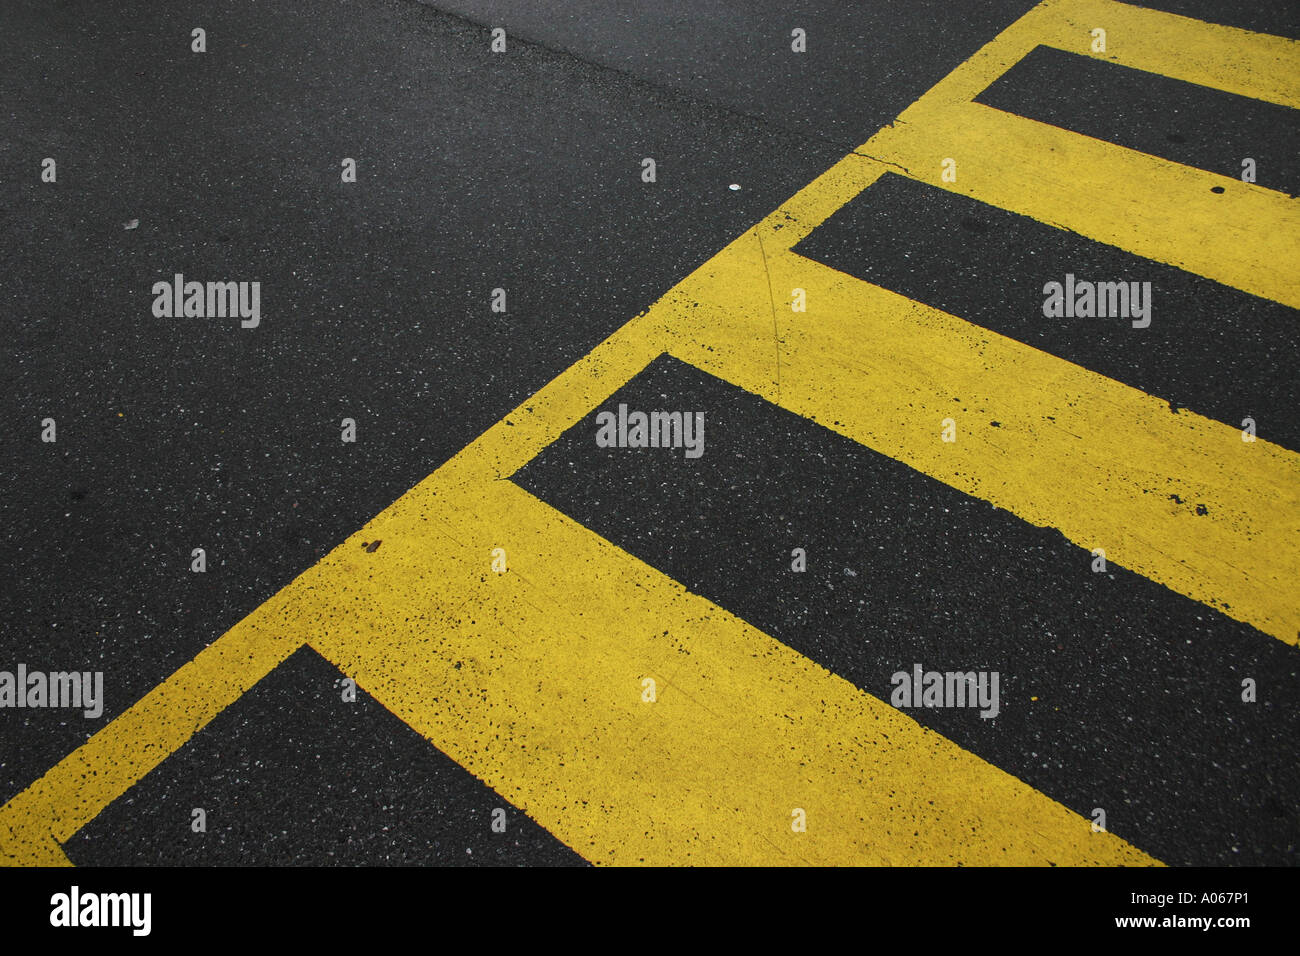 A section of a crosswalk with yellow stripes seen on the road Stock Photo